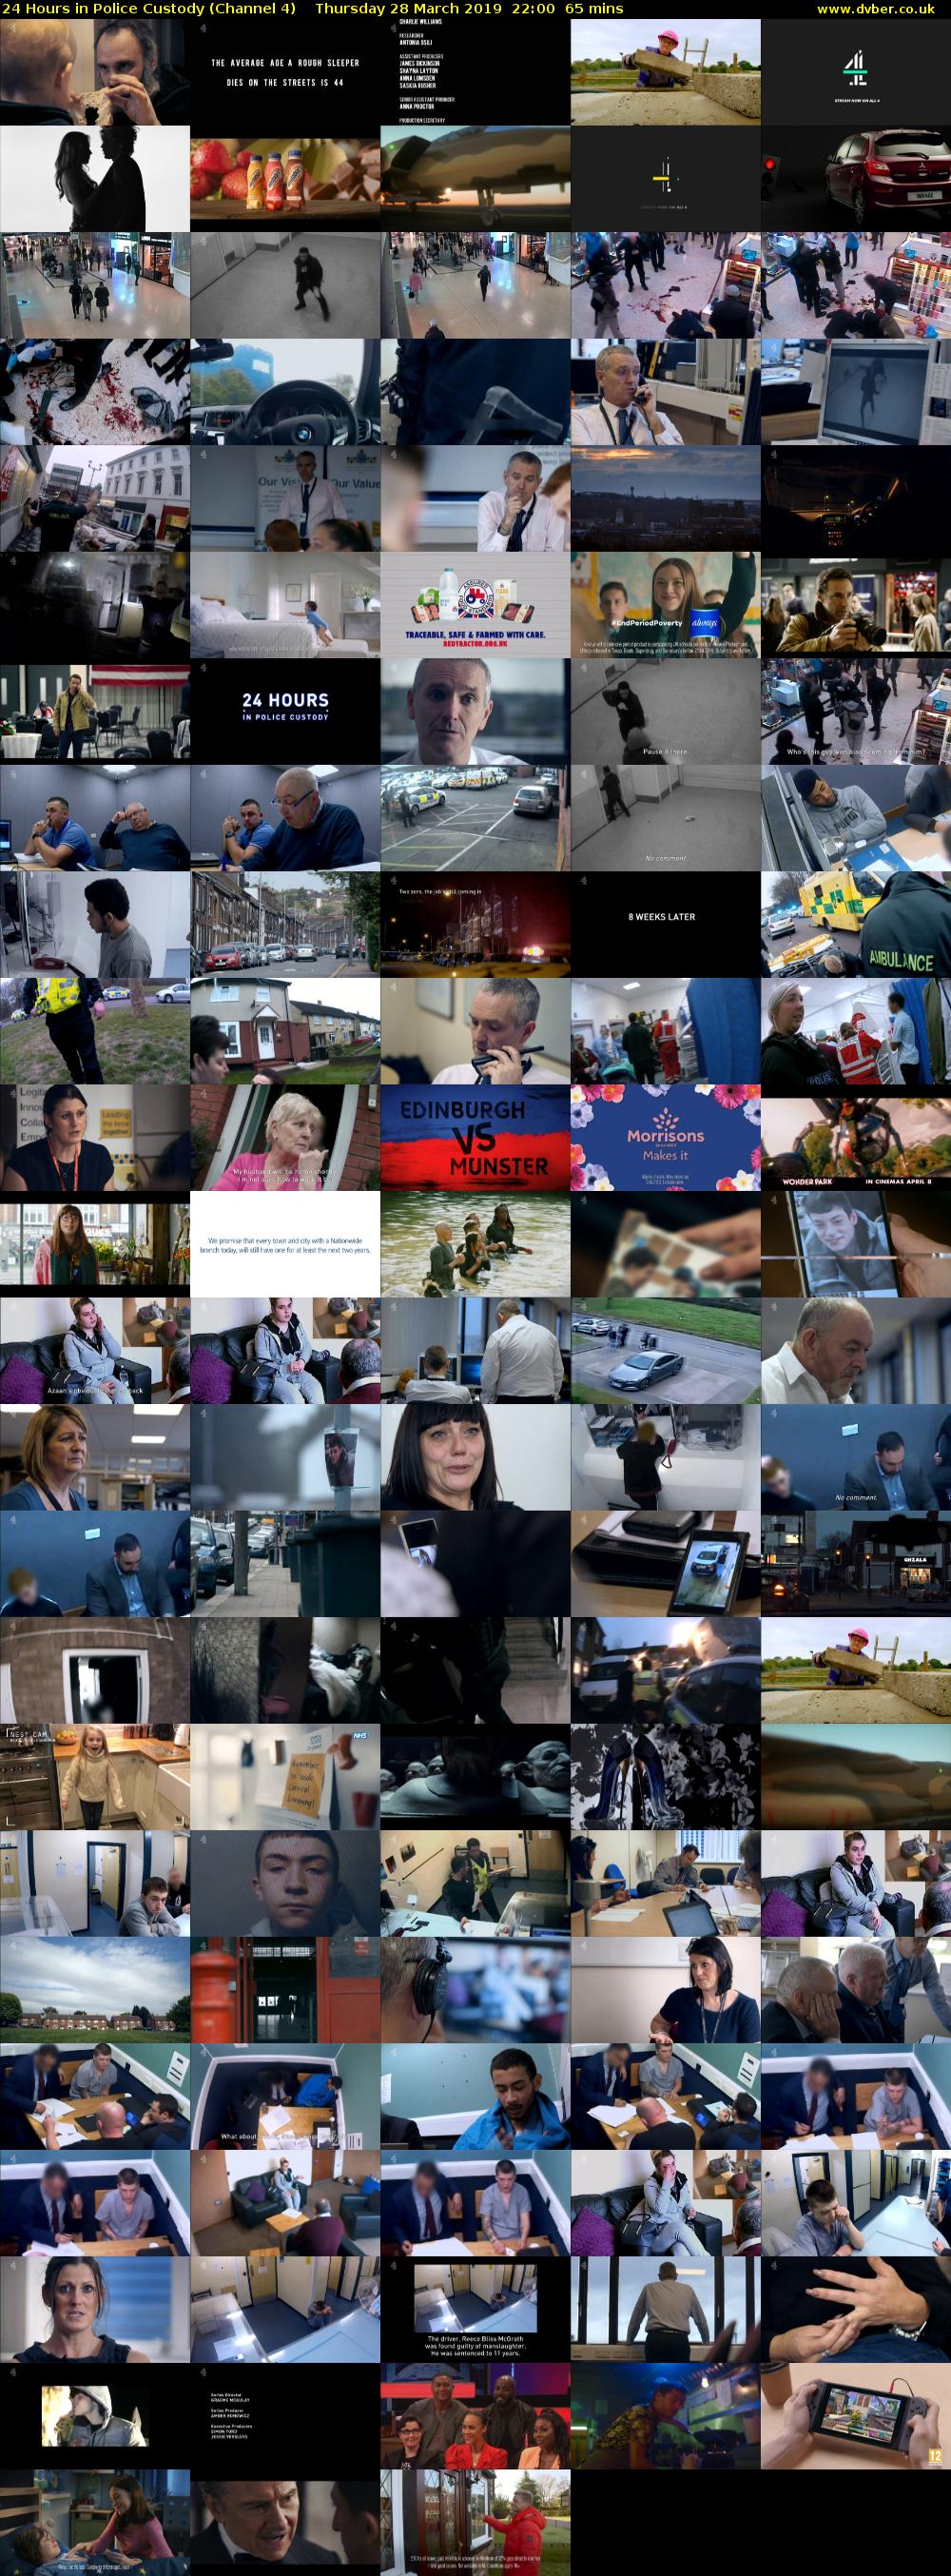 24 Hours in Police Custody (Channel 4) Thursday 28 March 2019 22:00 - 23:05